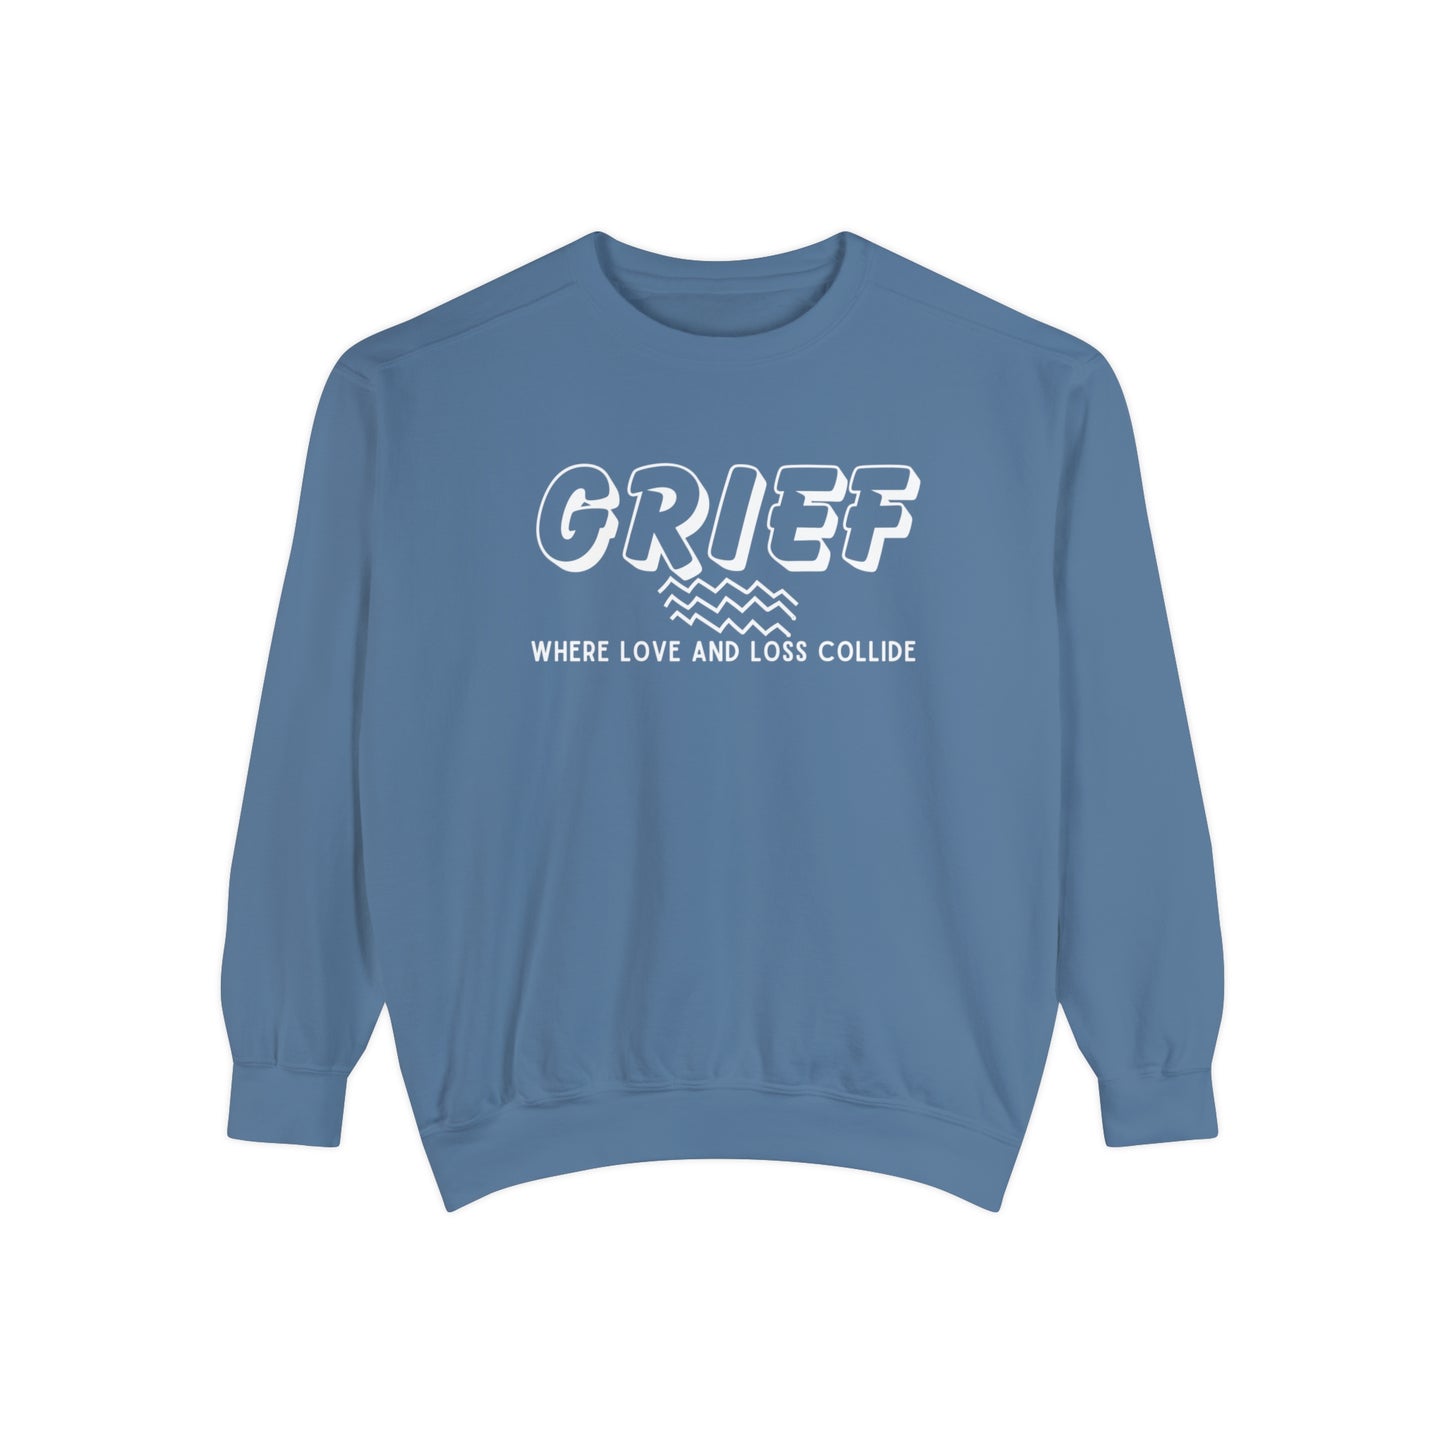 Blue Jean CC 1566 Sweatshirt. Grief, where love and loss collide